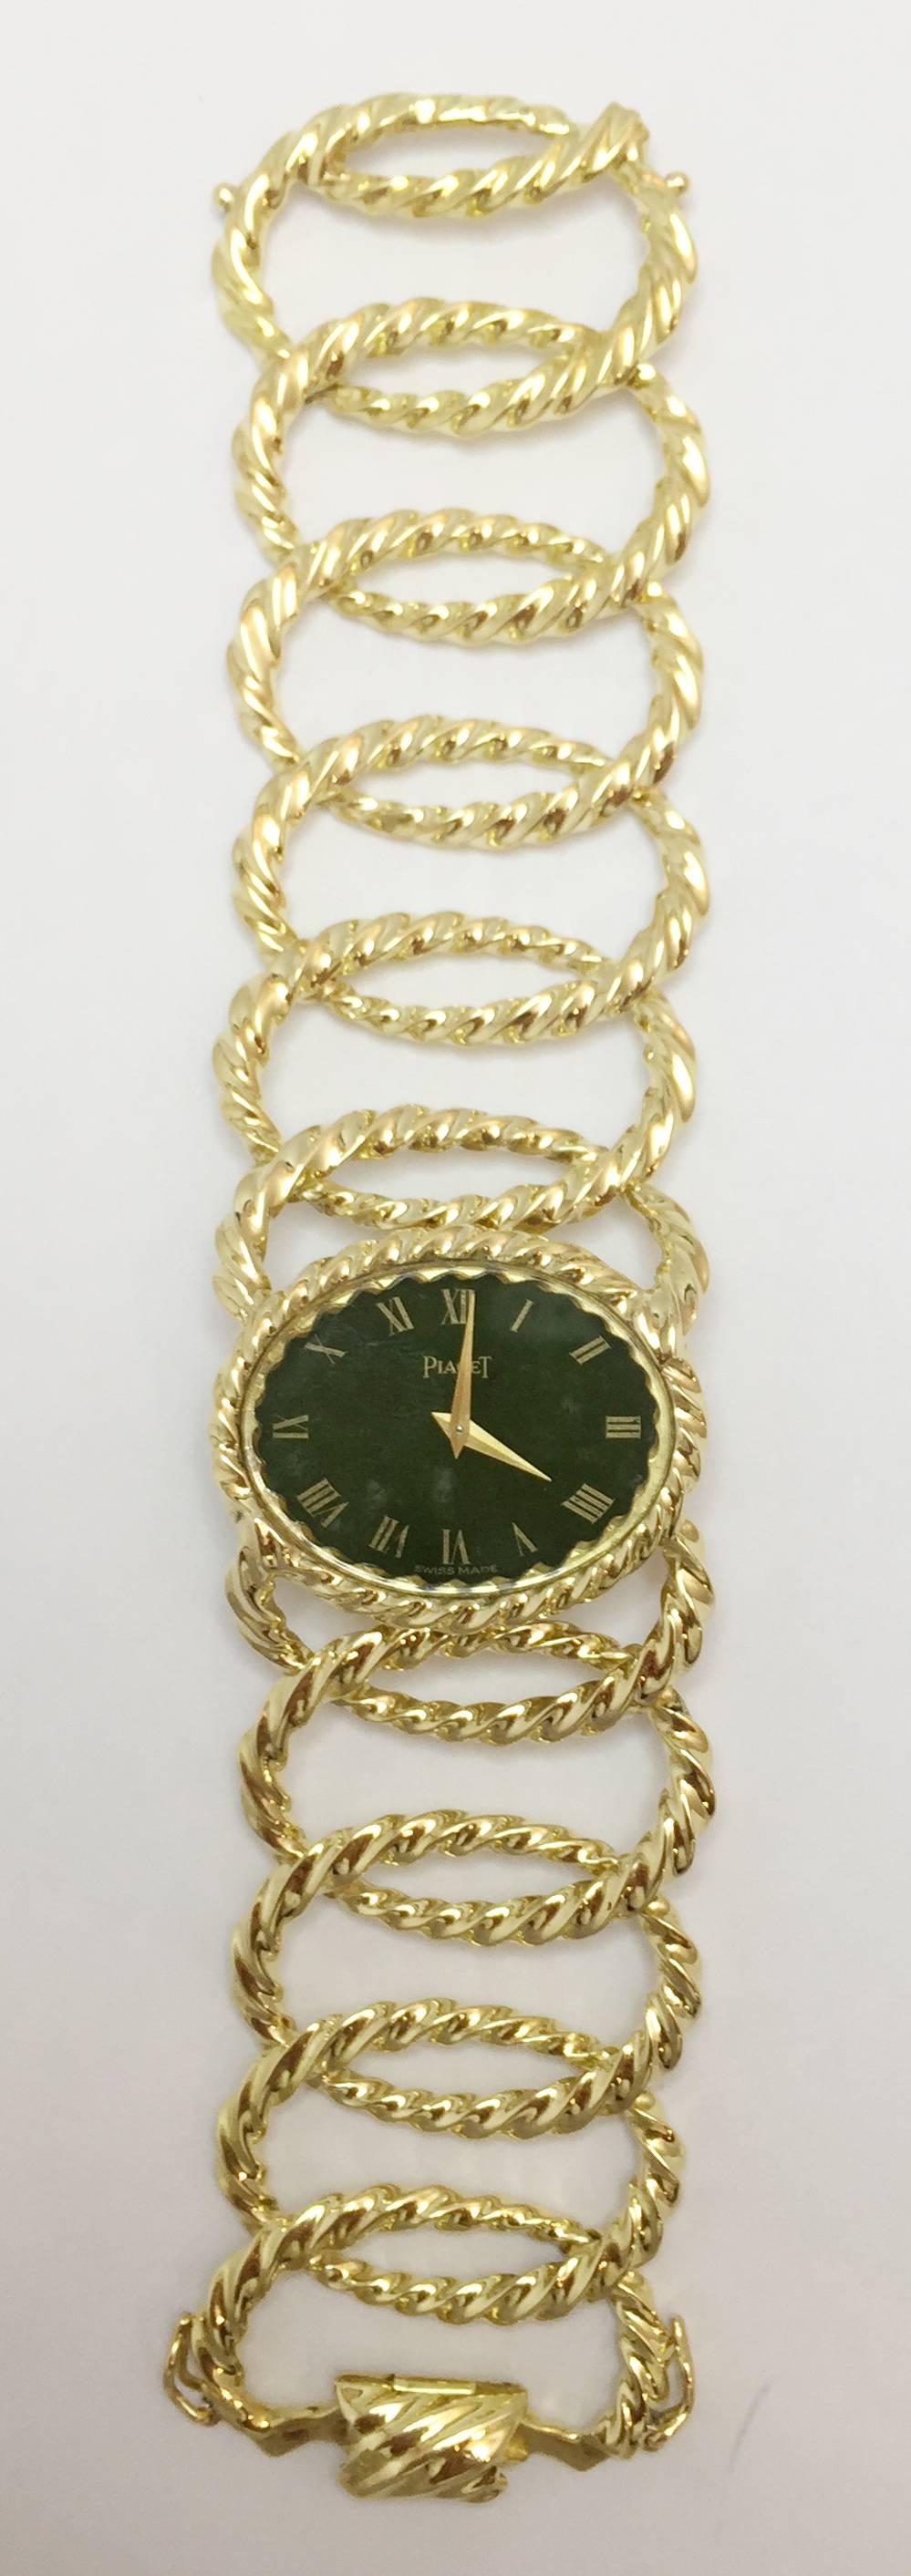 Piaget  Yellow gold nephrite dial 1970's wristwatch 1